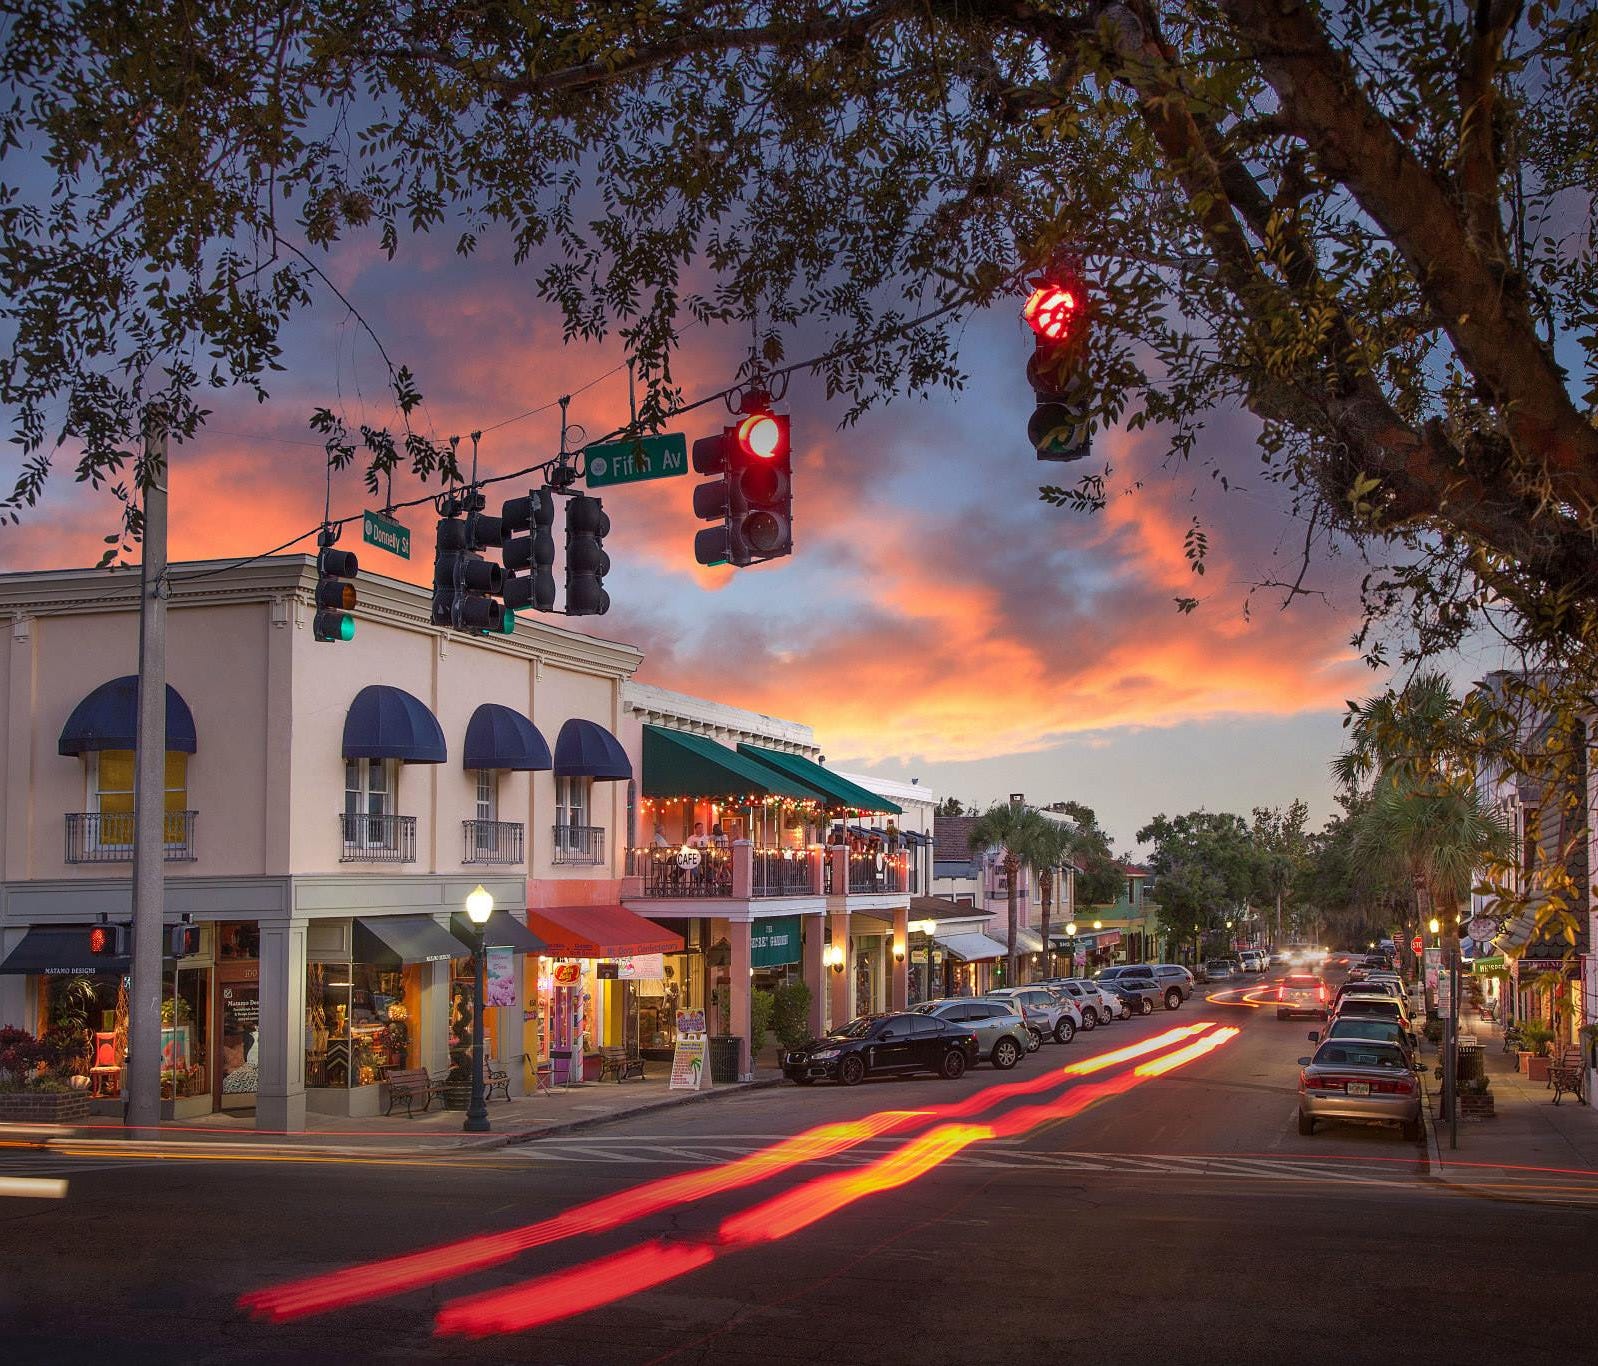 Florida: The charming town of Mount Dora, Florida is a popular Central Florida getaway, less than an hour from Orlando.